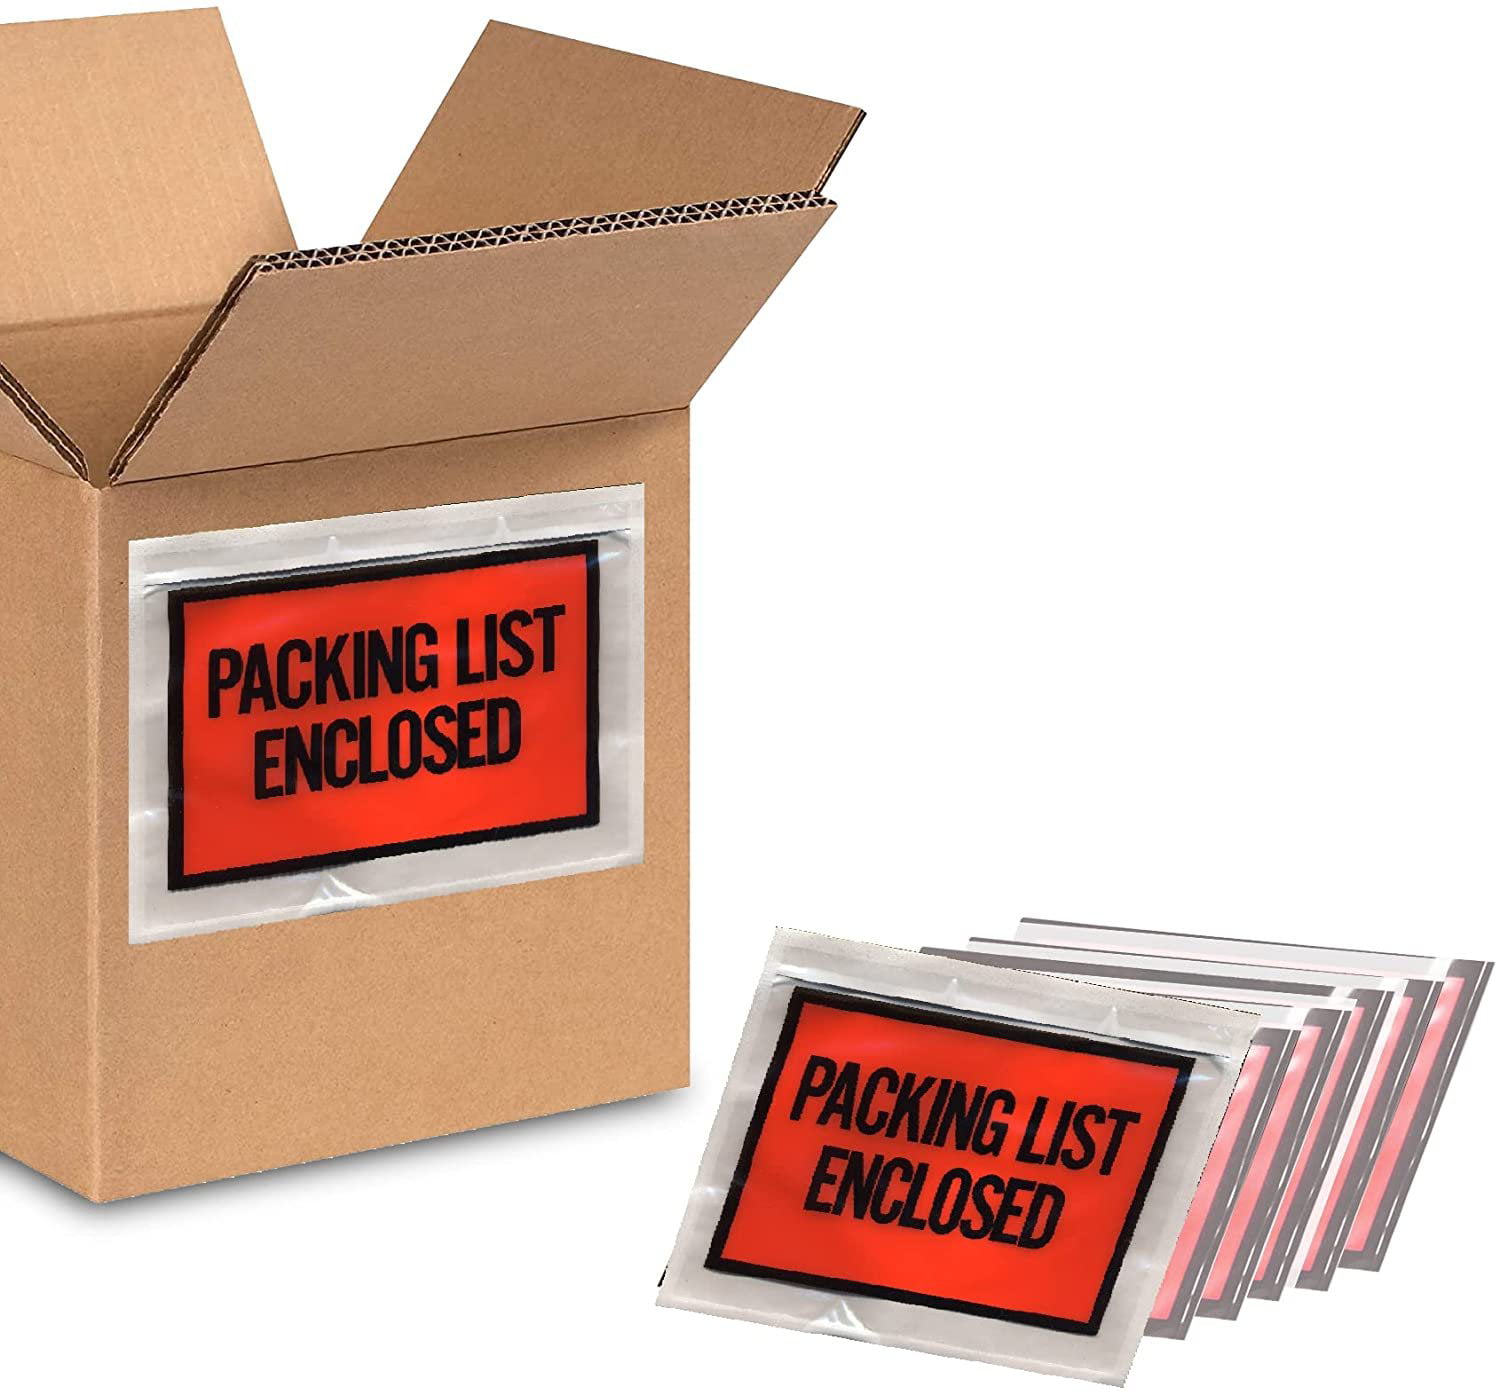 Packing List Enclosed 4.5 x 5.5 Panel Face Envelope Back Side Load 1000 Pieces 